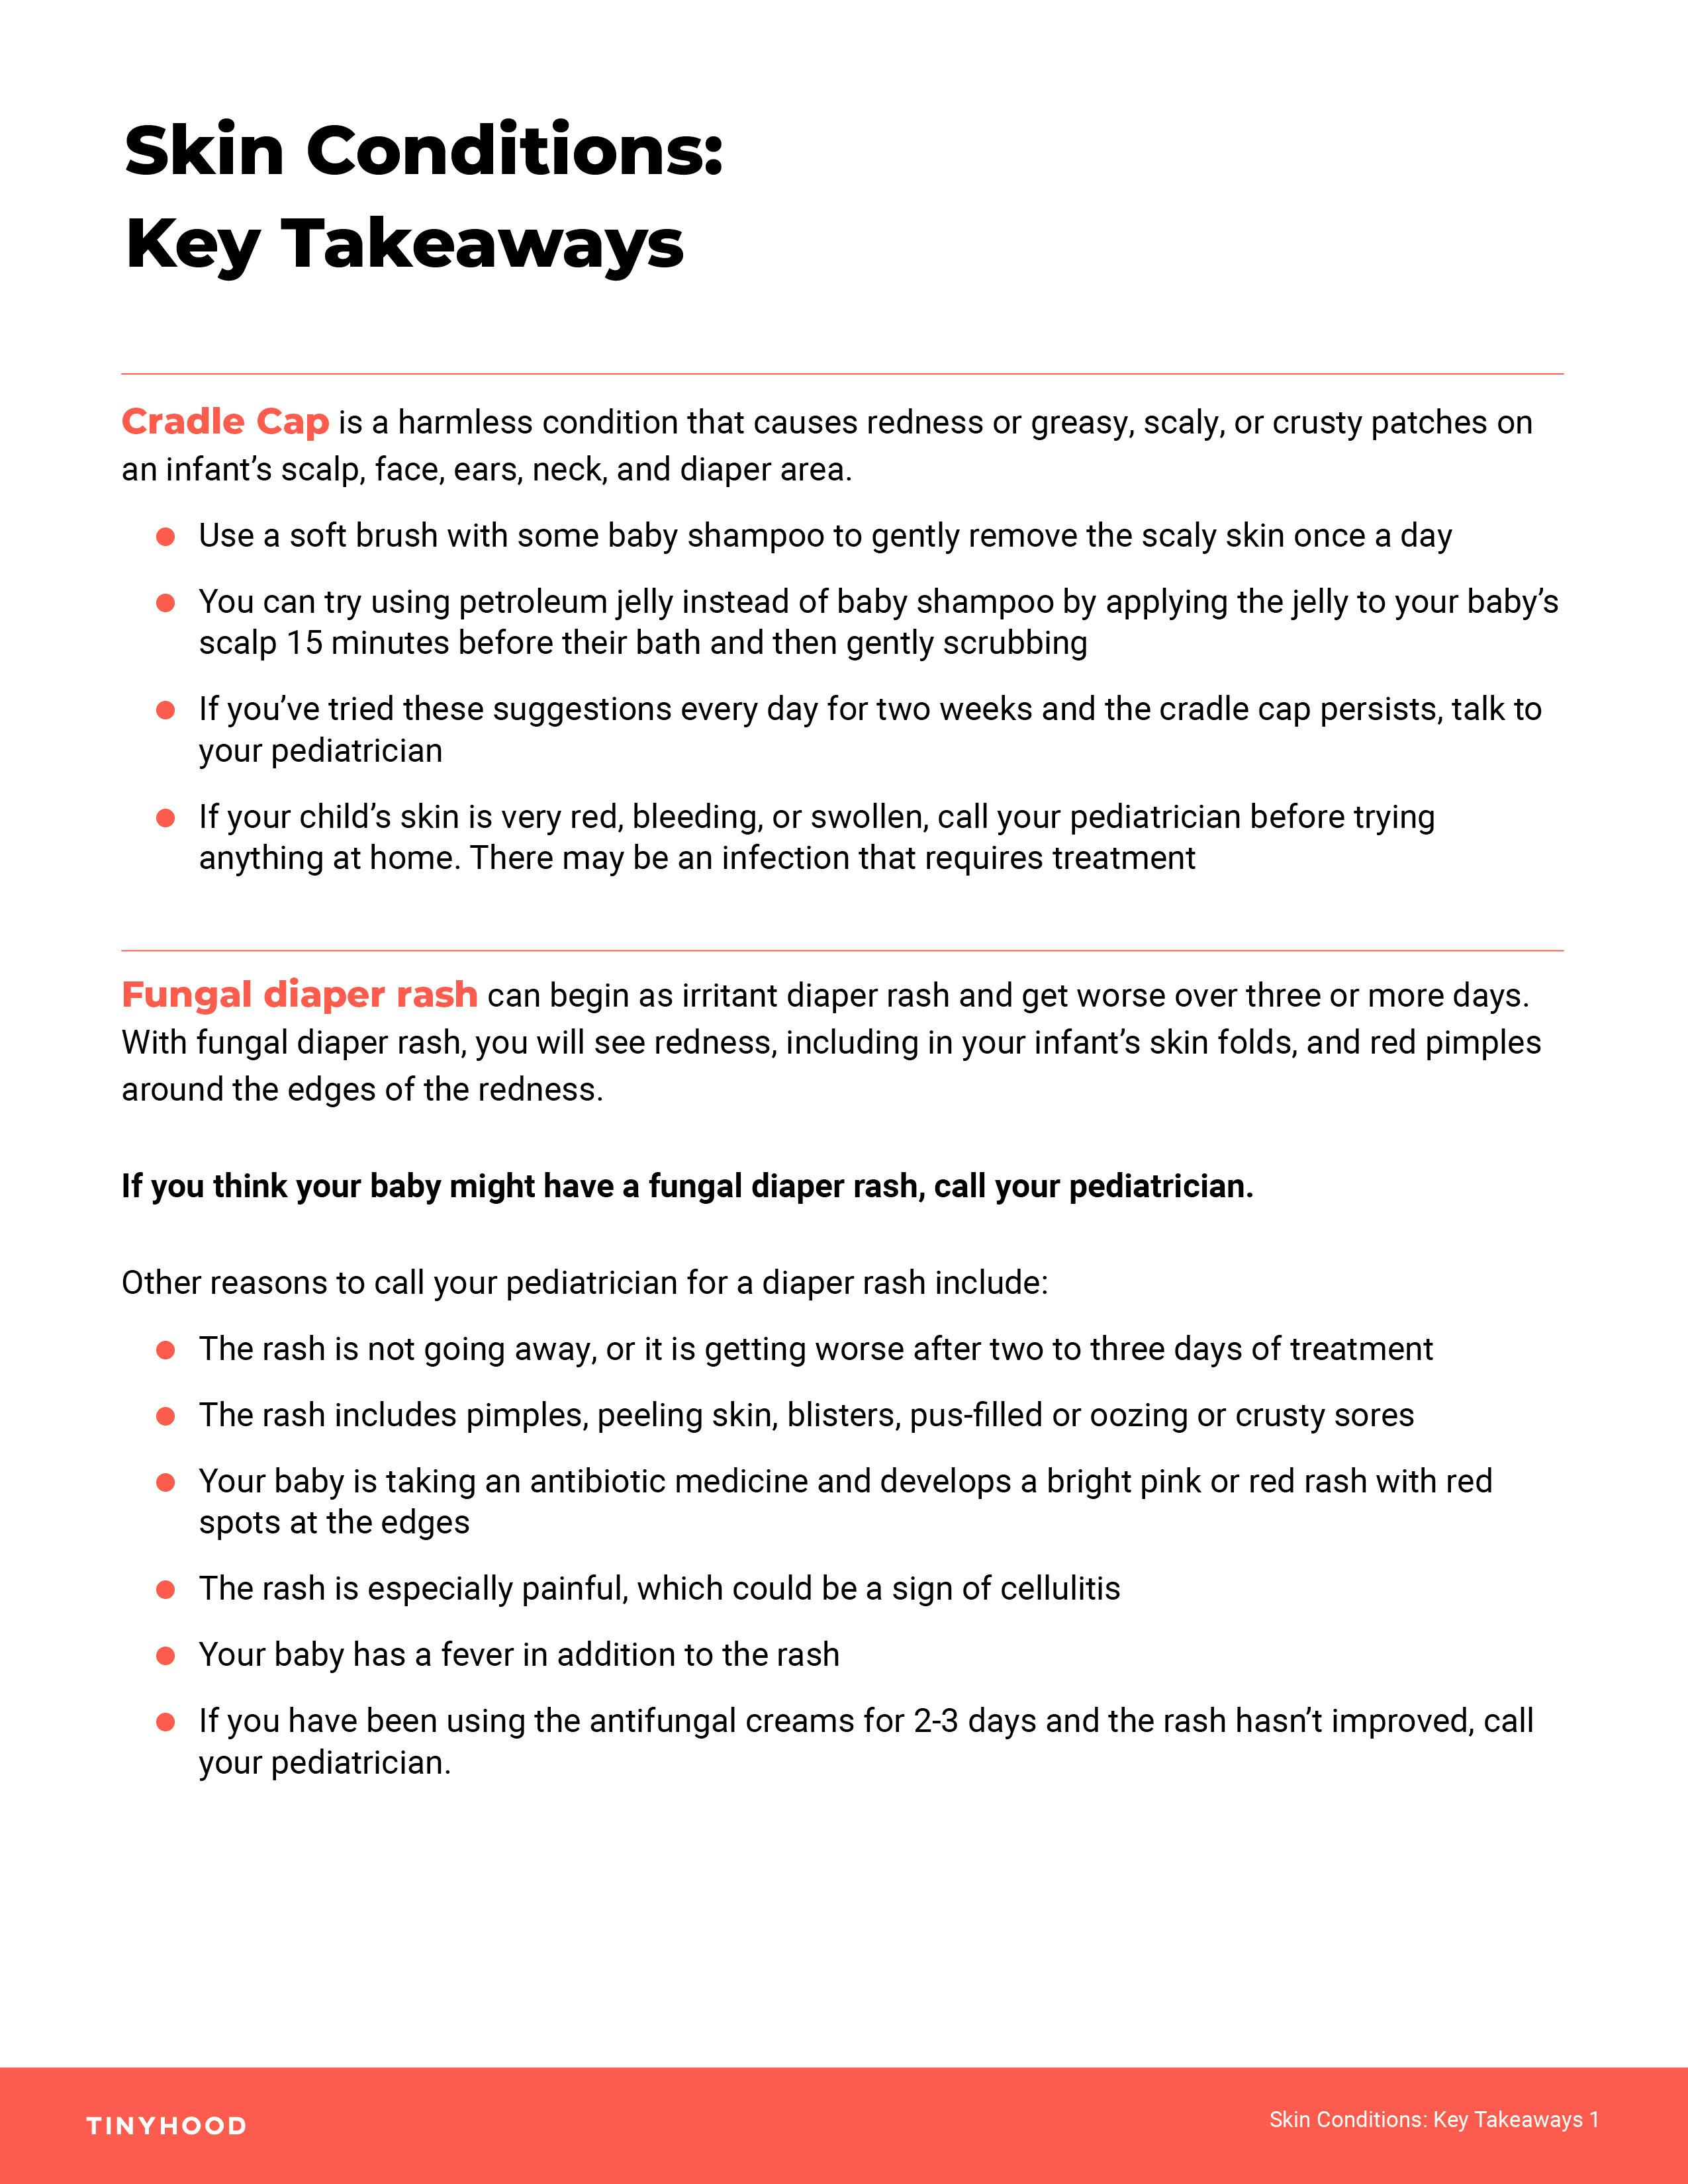 Preview image of Handout: Skin Conditions Key Takeaways